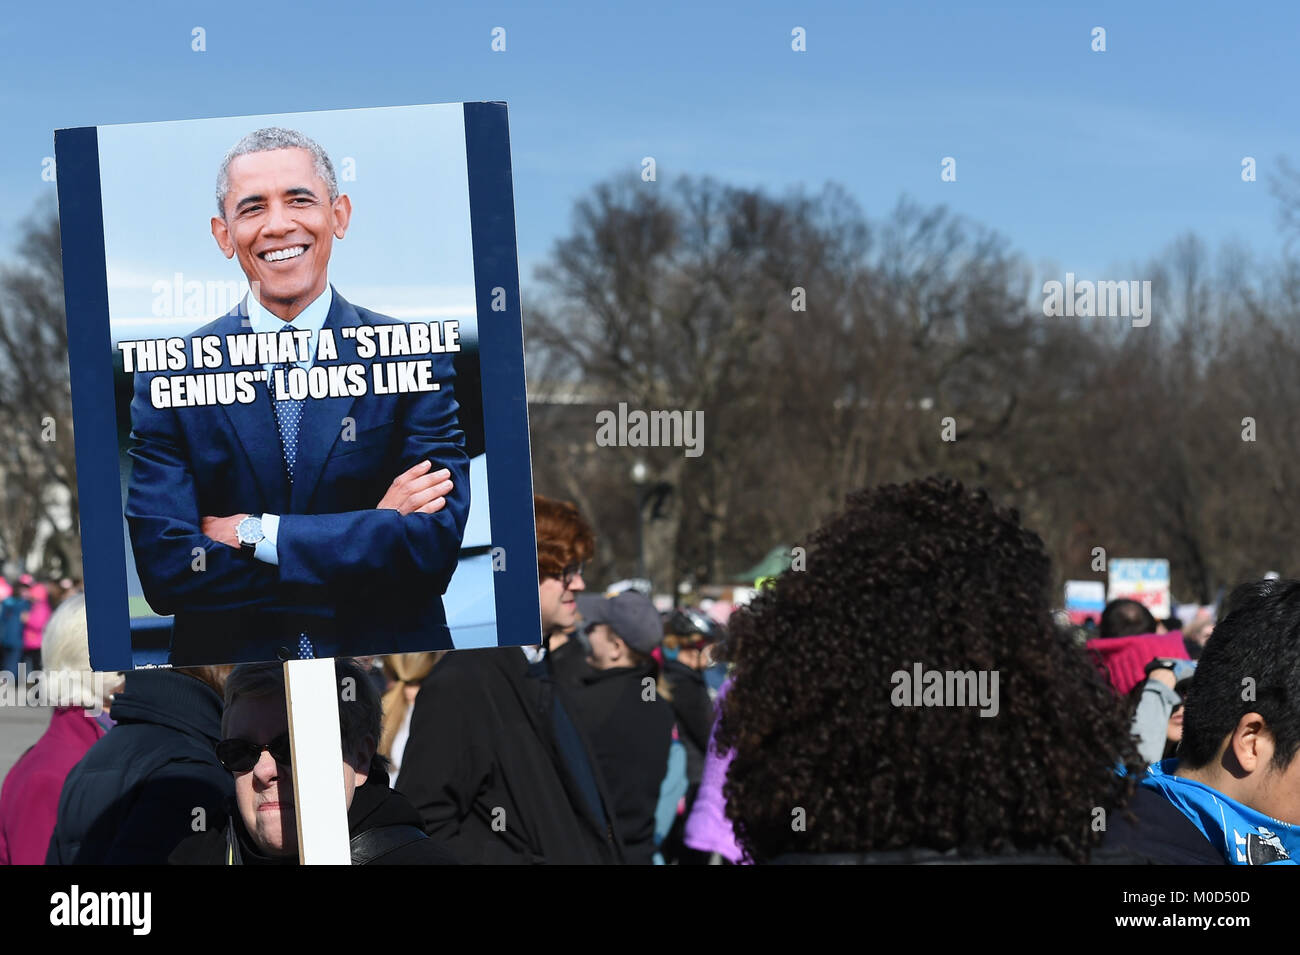 Washington DC, USA. 20th Jan, 2018. Jan. 20th Jan, 2018. A woman holding an Obama support poster walks during the Women's March around Lincoln Memorial in Washington, DC, on Jan. 20, 2018 in Washington Credit: csm/Alamy Live News Credit: Cal Sport Media/Alamy Live News Stock Photo